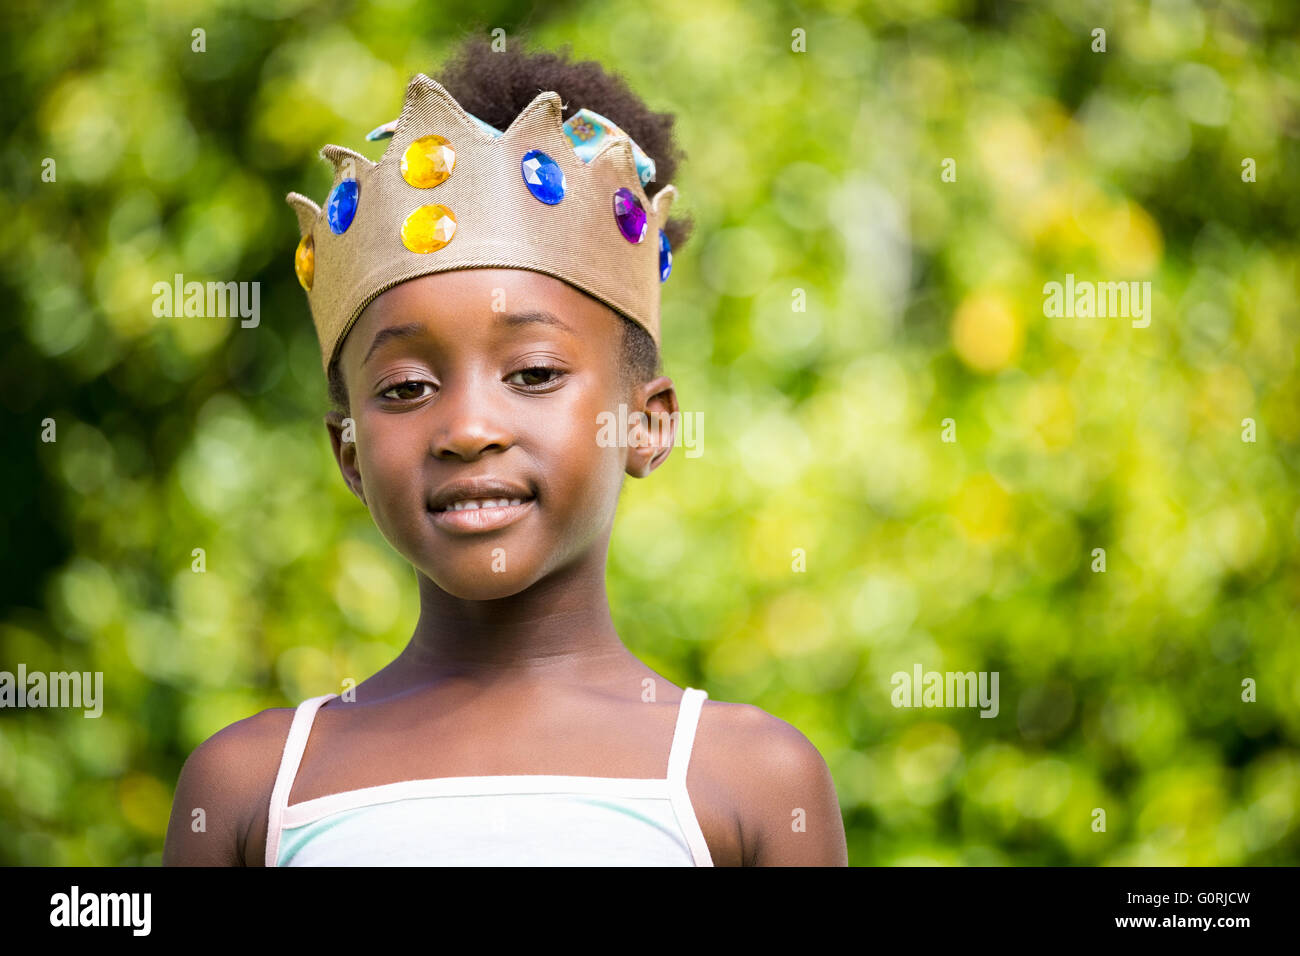 Portrait of a mixed-race girl smiling and wearing a crown Stock Photo